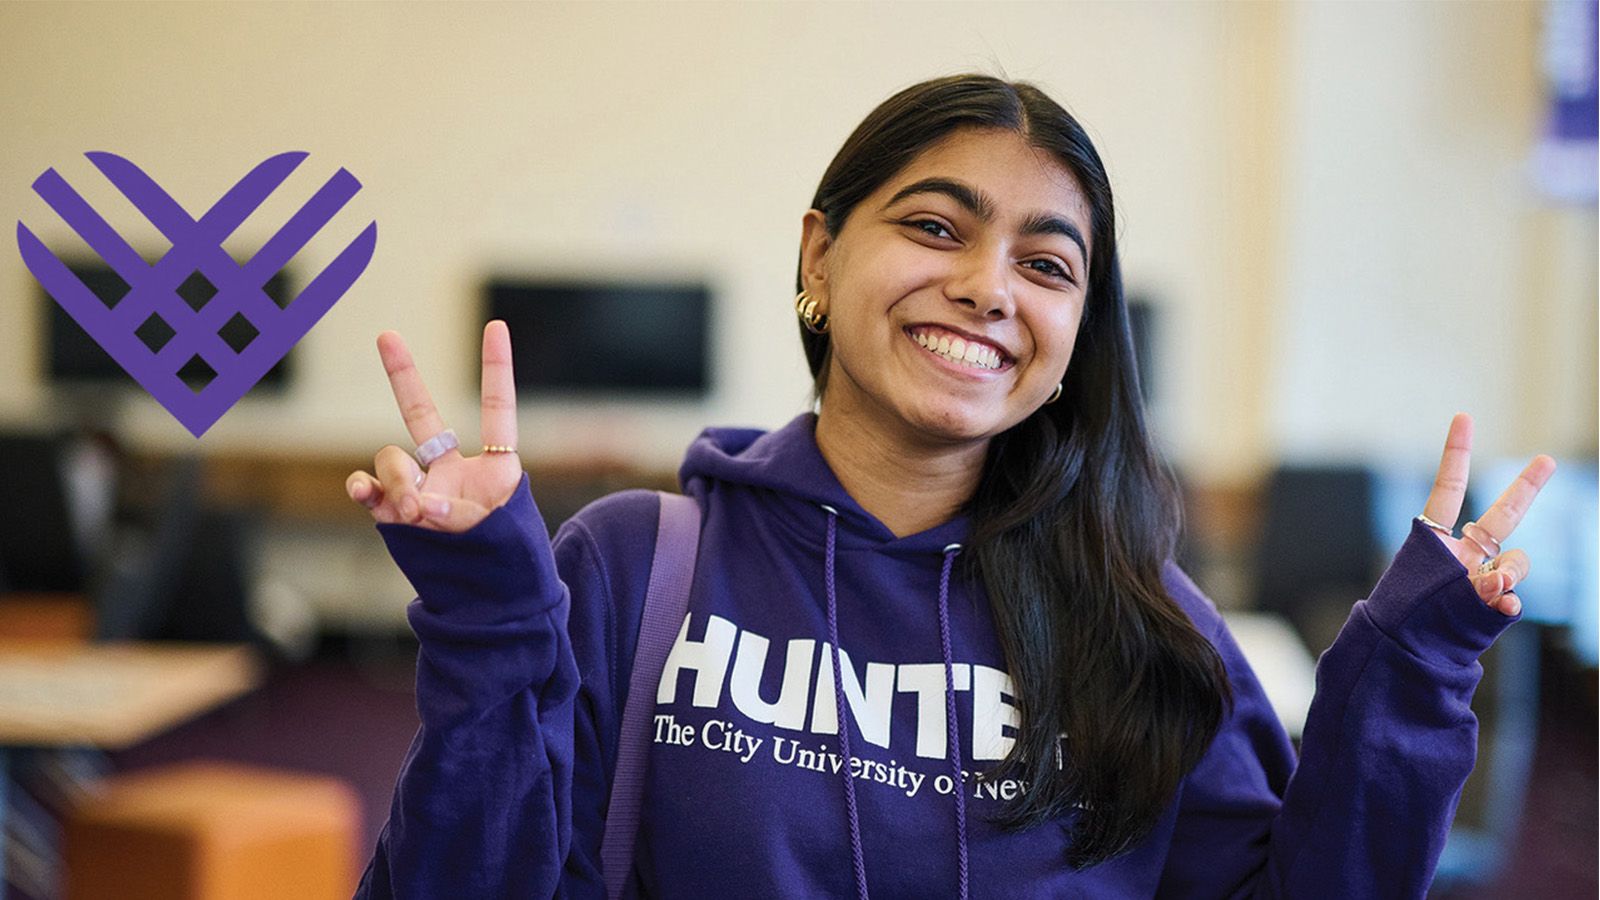 Student wearing a Hunter hoodie